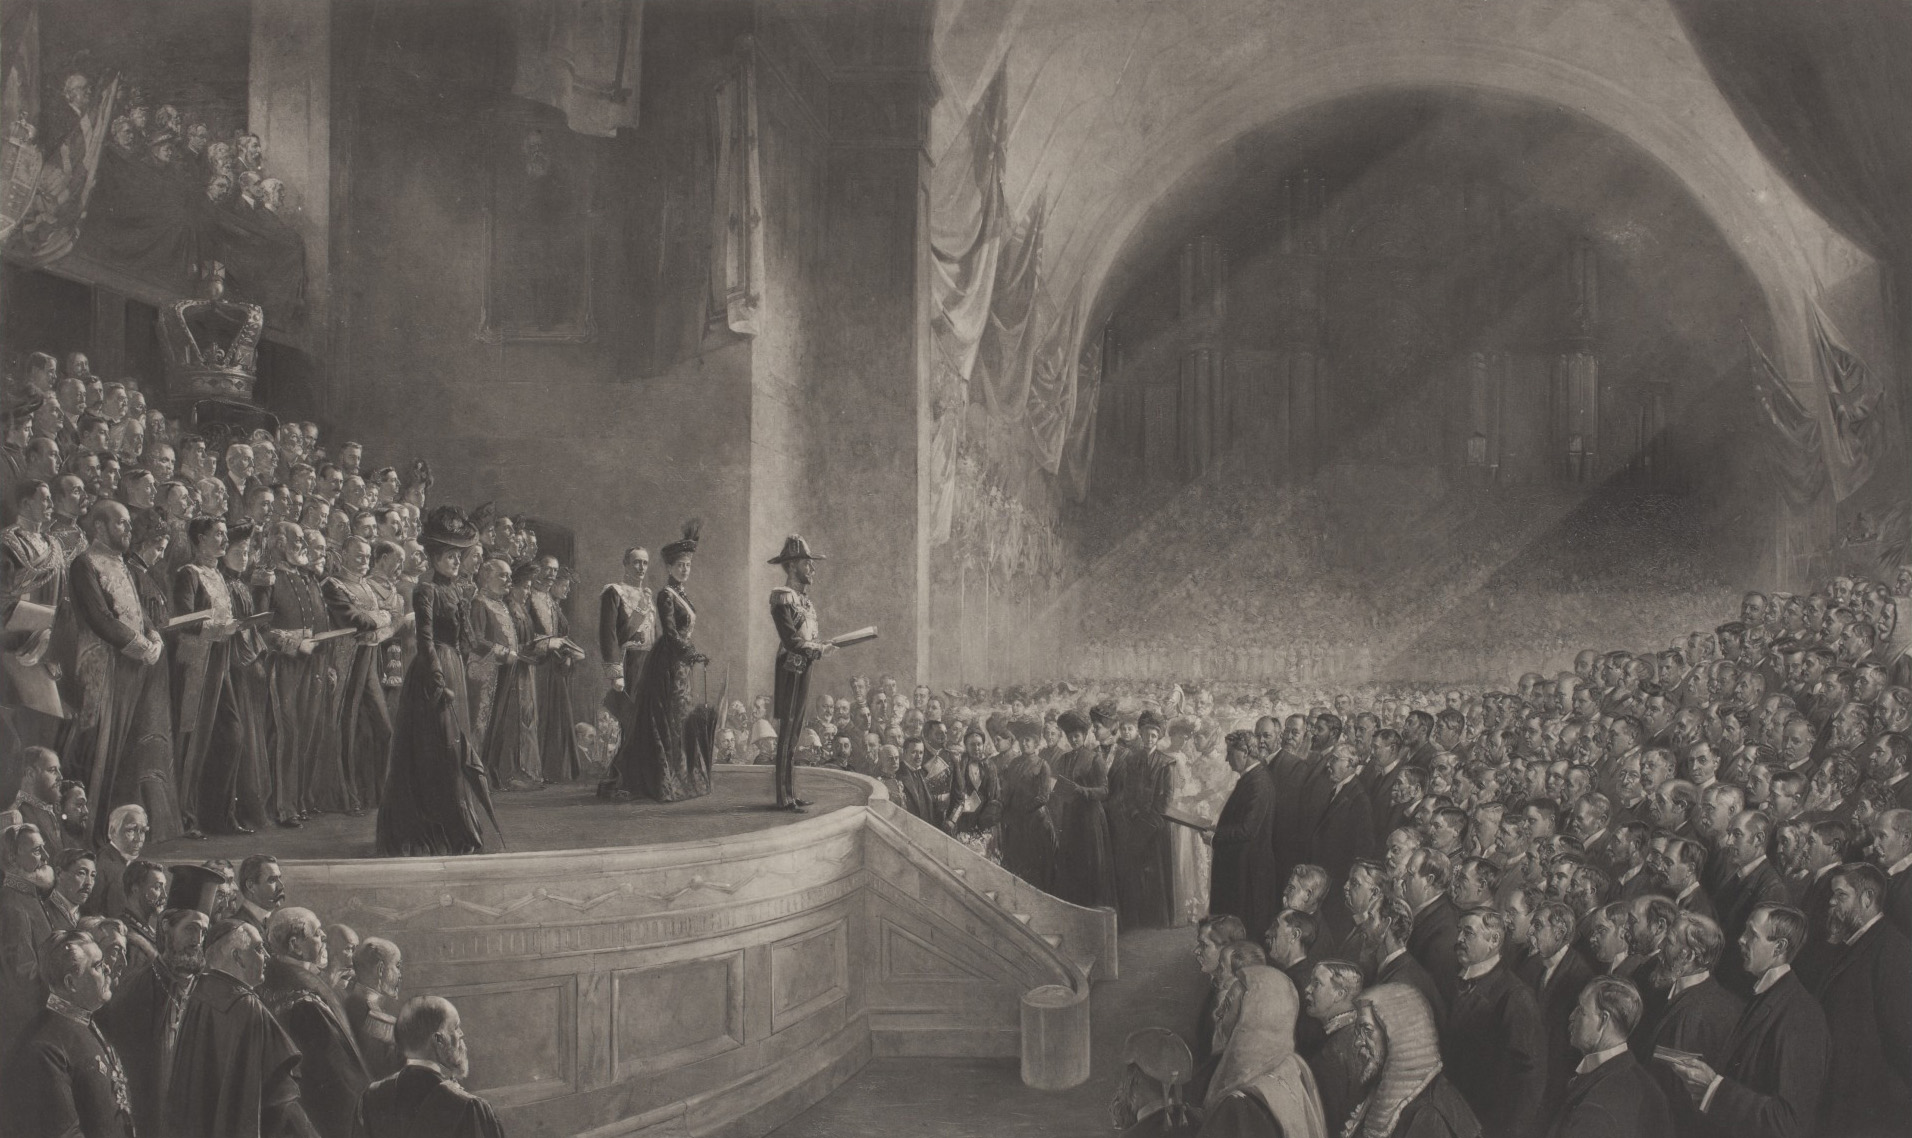 <p><em>Opening of the First Parliament of the Commonwealth of Australia by HRH  The  Duke of Cornwall and York (Later HM King George V), May 9, 1901</em>, by Tom Roberts</p>
